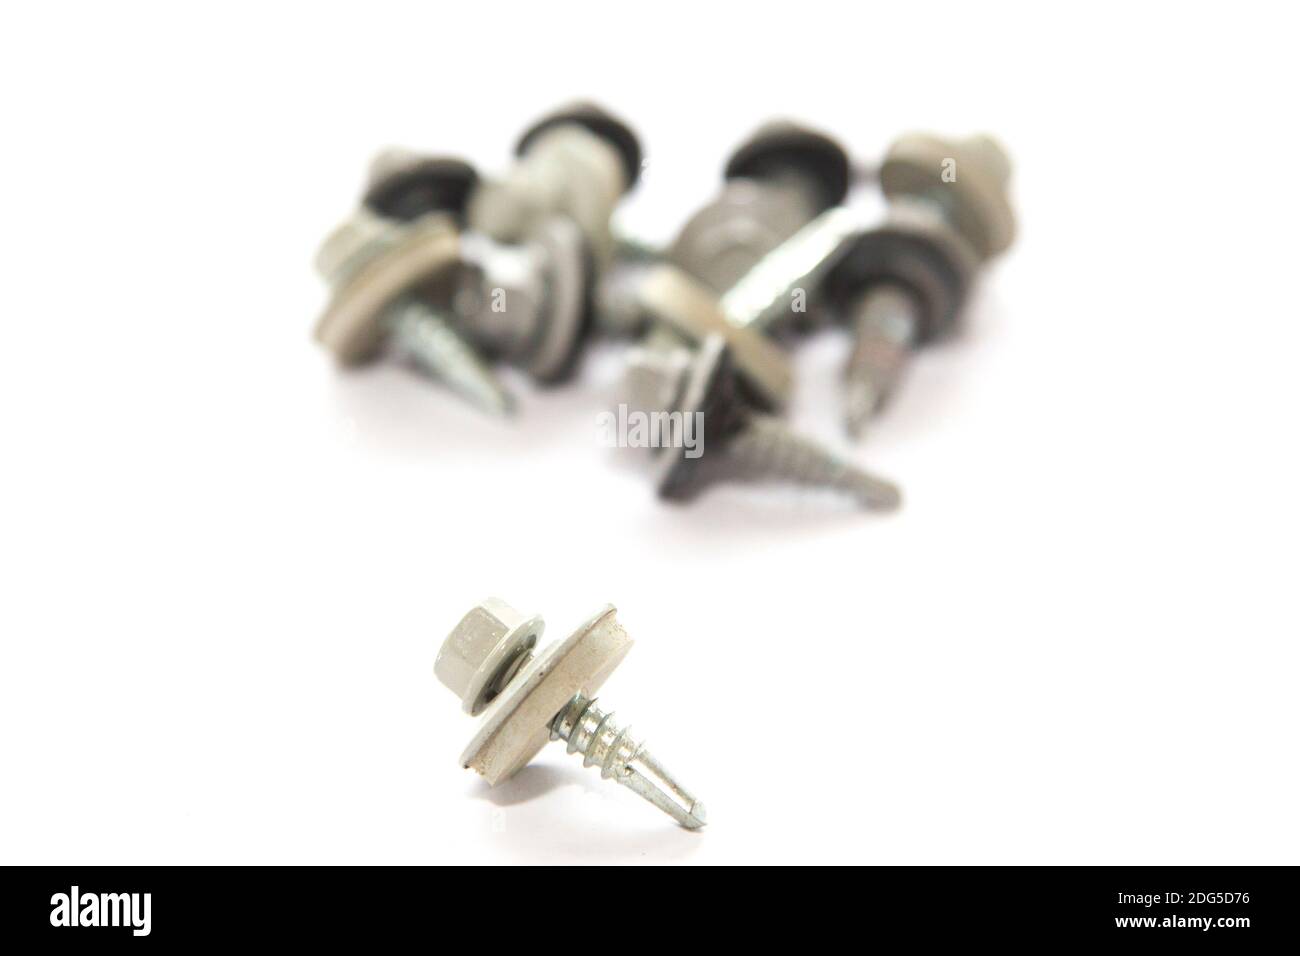 metal screw in close-up with pile of screws out of focus background on white background Stock Photo